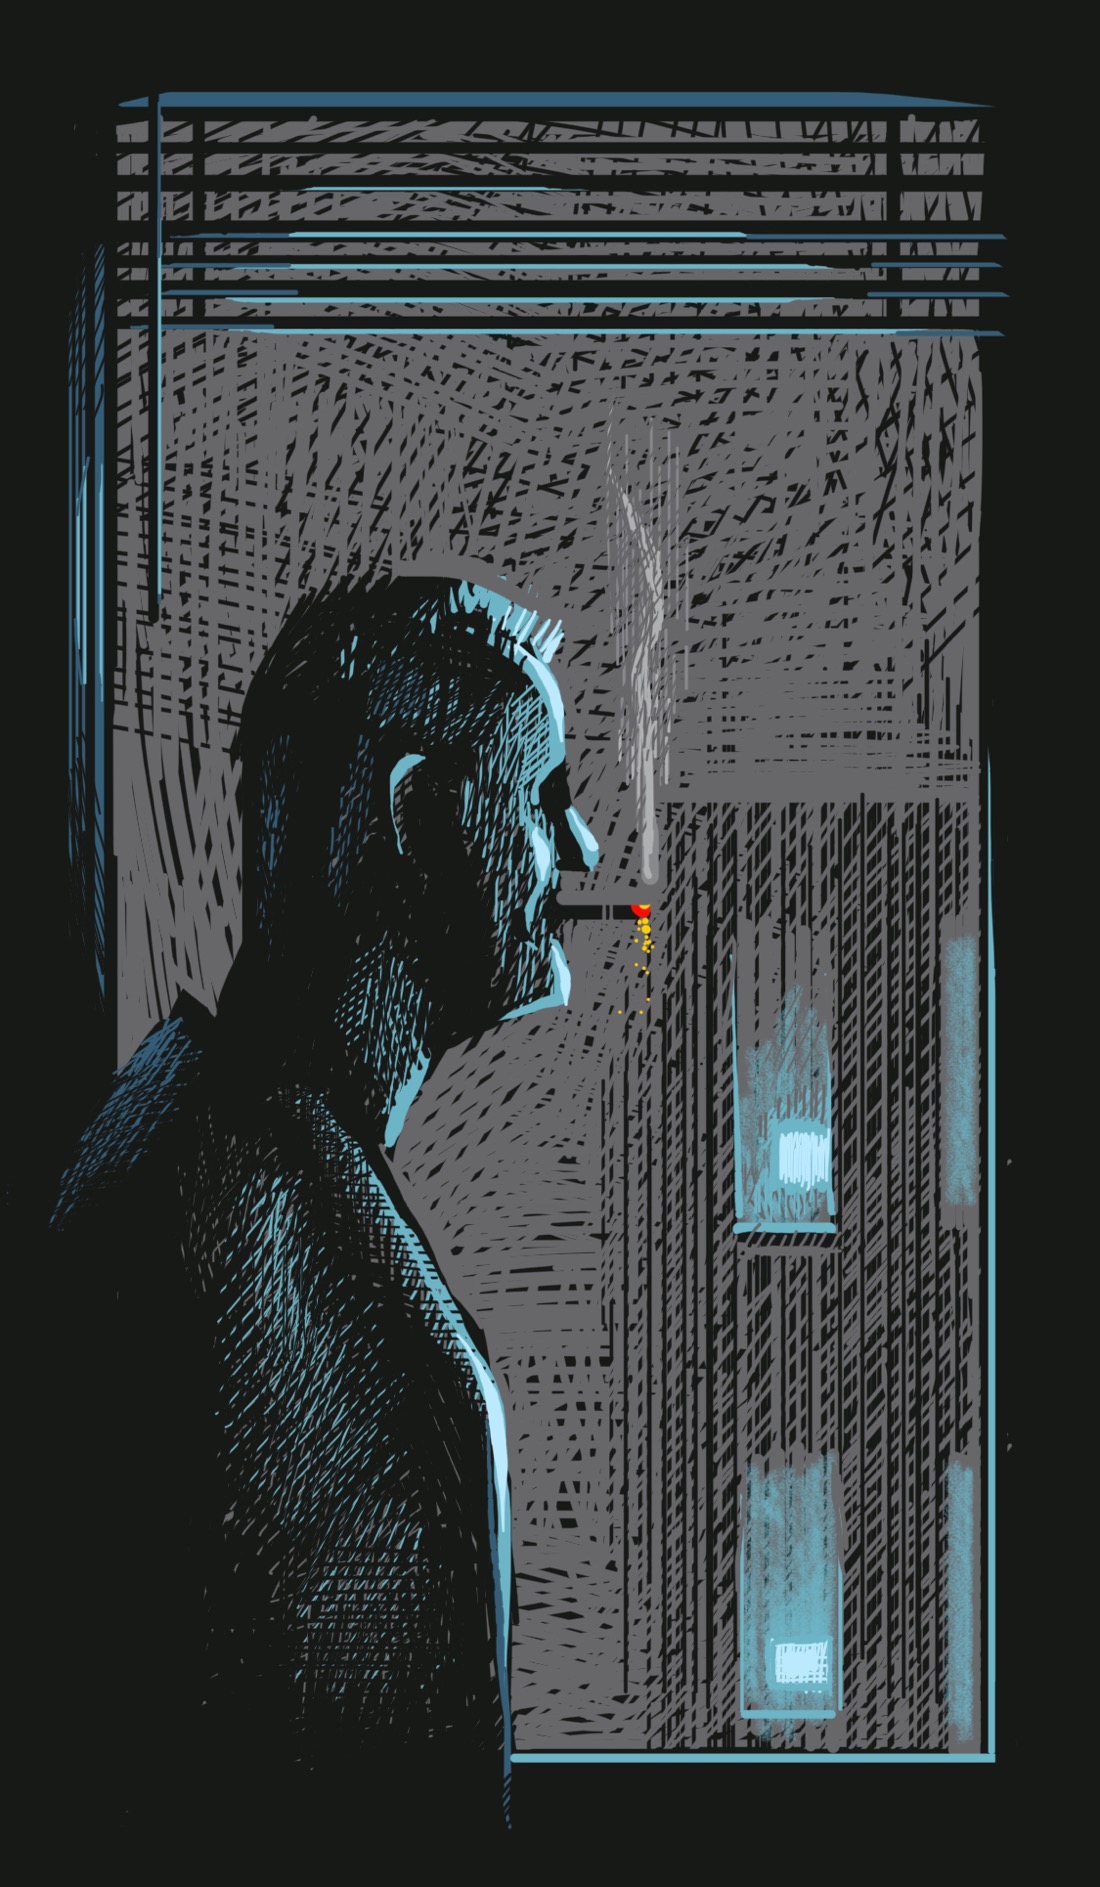 A scene in a dark room. A tall, thin person stands by a grimy window, looking out at the tenement building next door. It's night, one of those dull gray city nights that's never really that dark. The windows in the building next door are illuminated with the blue glow of television screens. The light from outside illuminates the inner frame of the window, and the Venetian blinds at the top of the window. The person by the window is seen in profile. The person is smoking a cigarette and has short, crew-cut hair and a leather jacket.